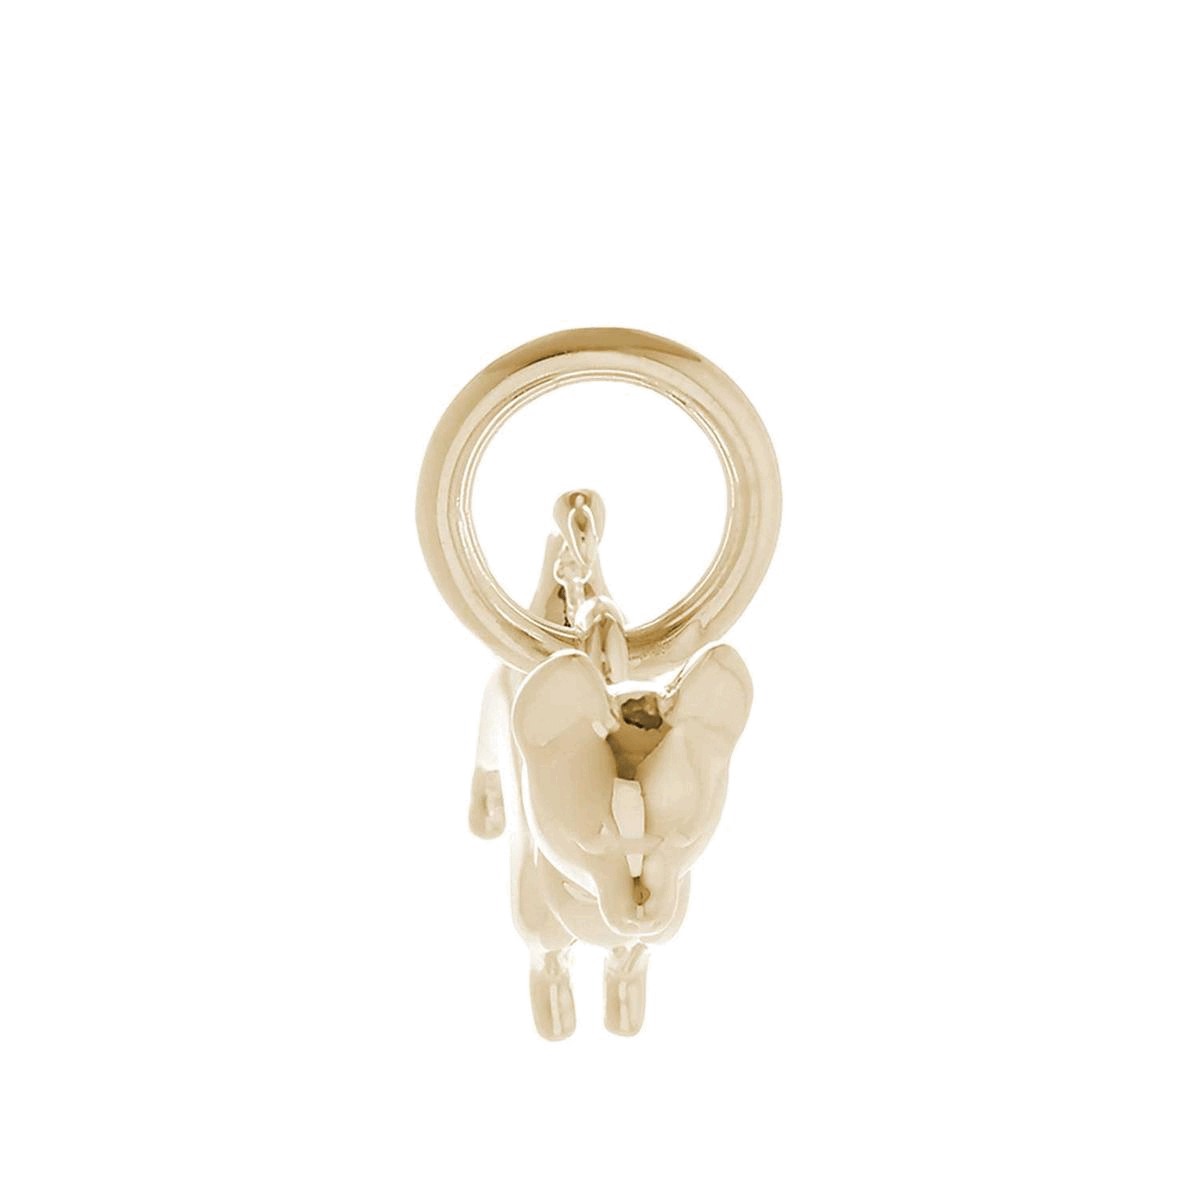 chihuahua dog solid 9 carat 9ct 9k gold charm for bracelet or necklace